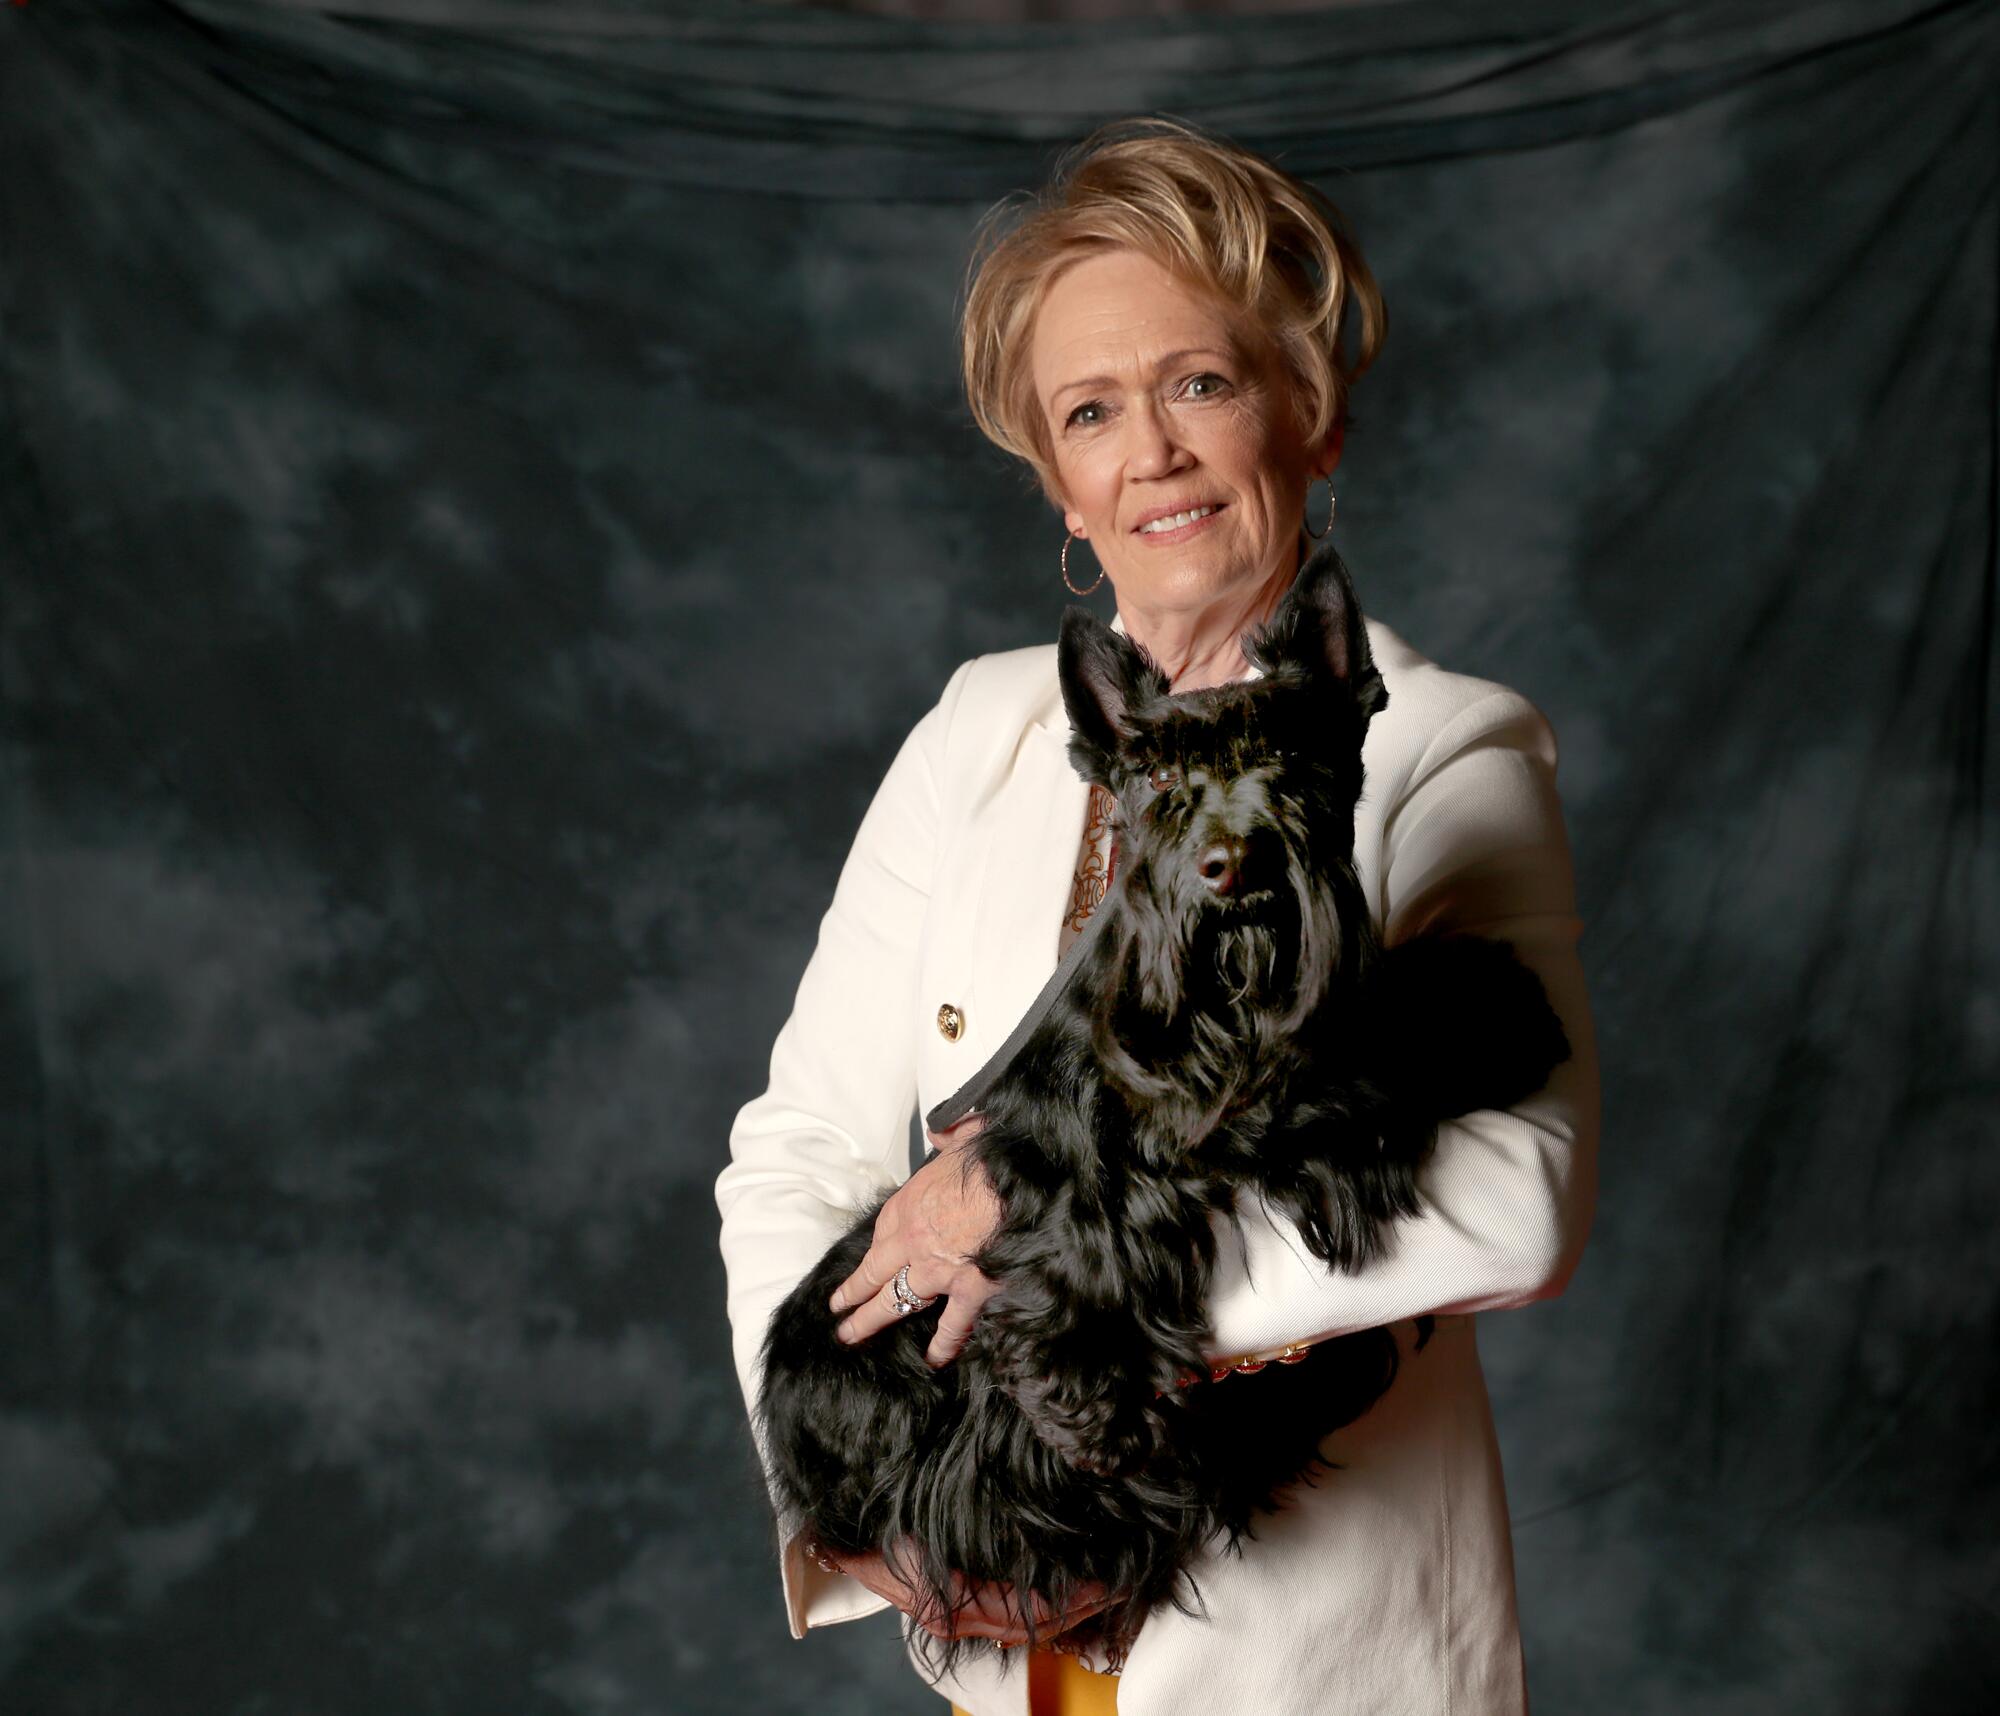 Connie Kling, 65, poses with her 3-year-old grand champion Scottish terrier, Annika. Annika loves freeze-dried liver.